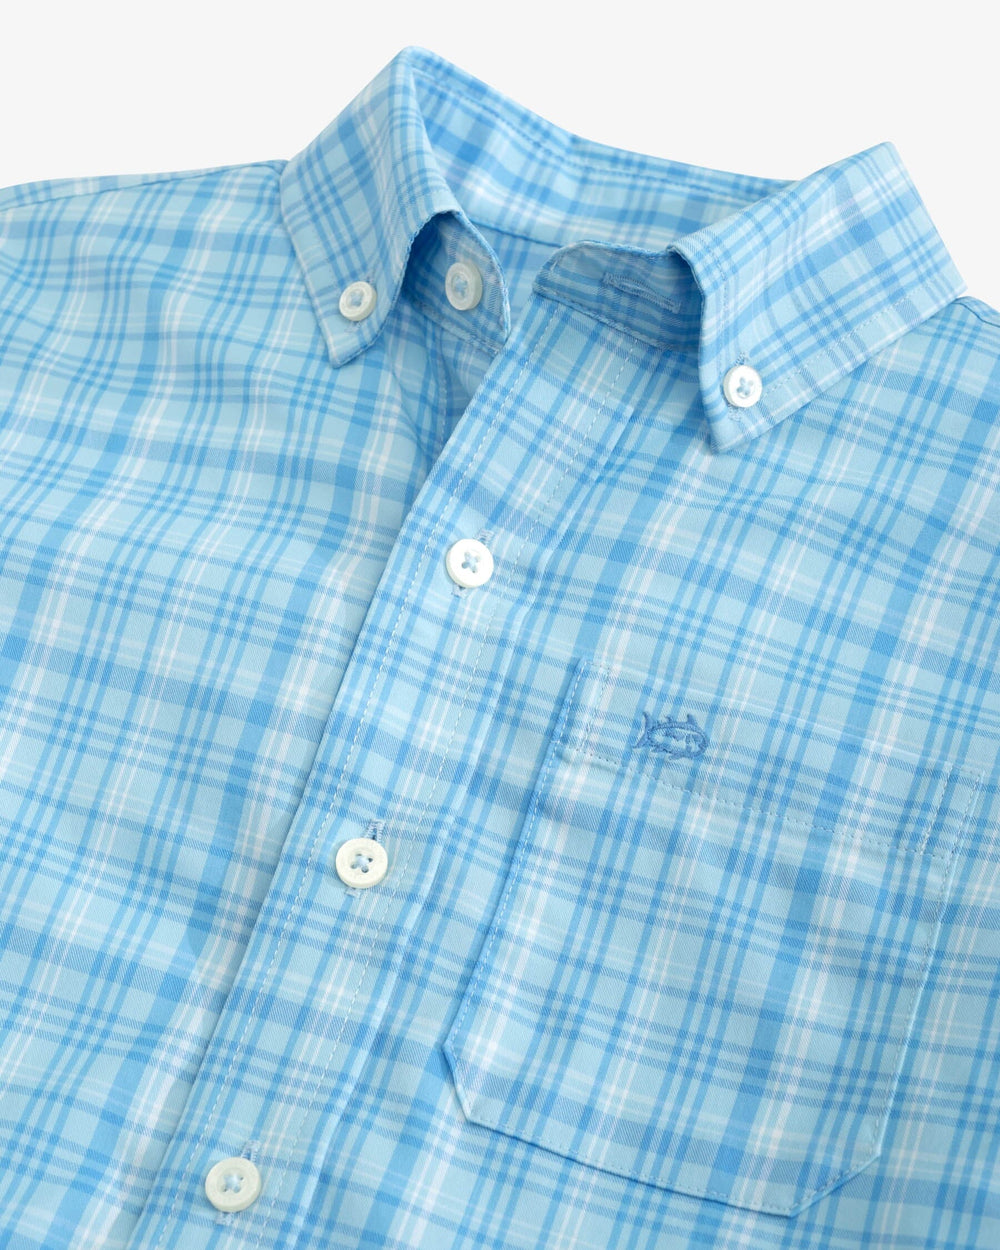 The detail view of the Southern Tide Boys Keowee Plaid Intercoastal Sport Shirt by Southern Tide - Rain Water